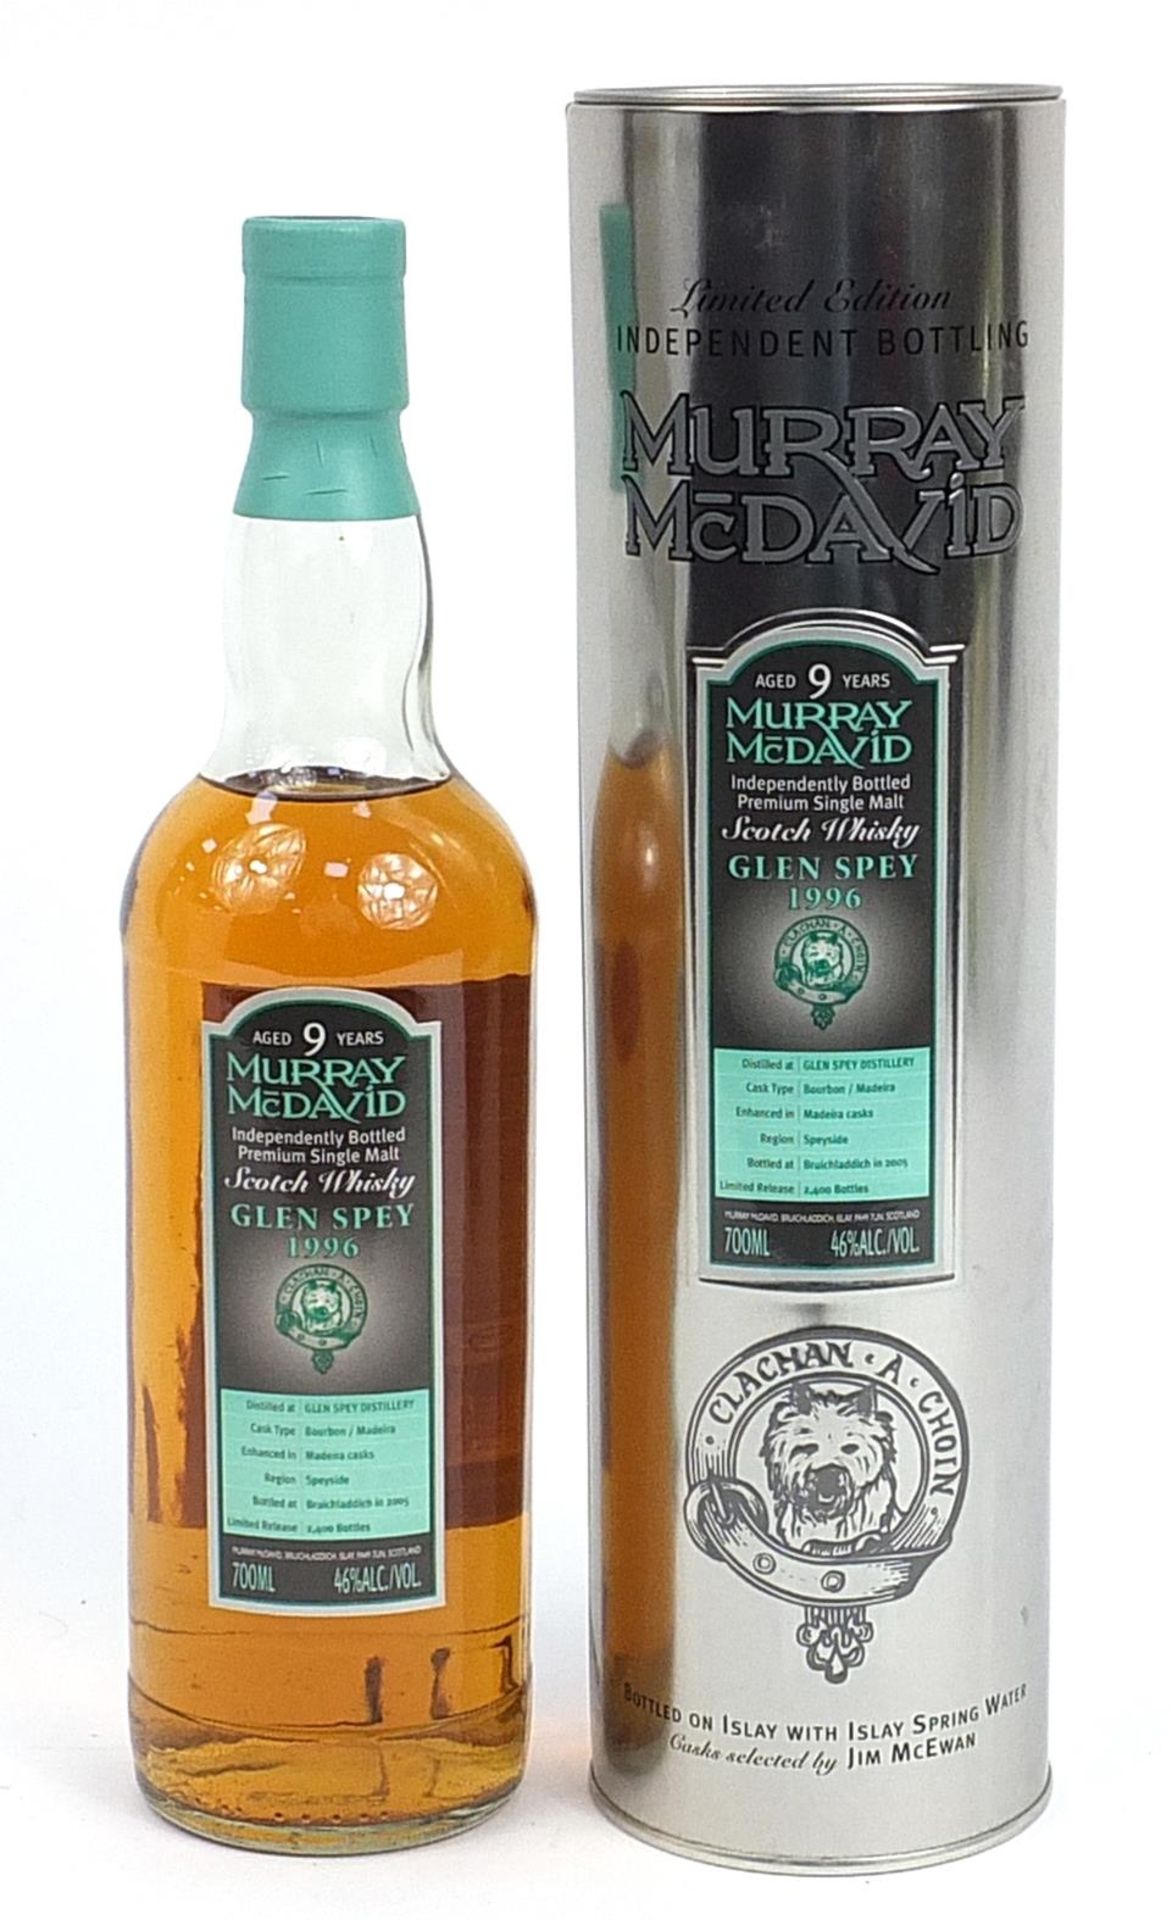 Bottle of limited edition Murray McDavid whiskey aged 9 years